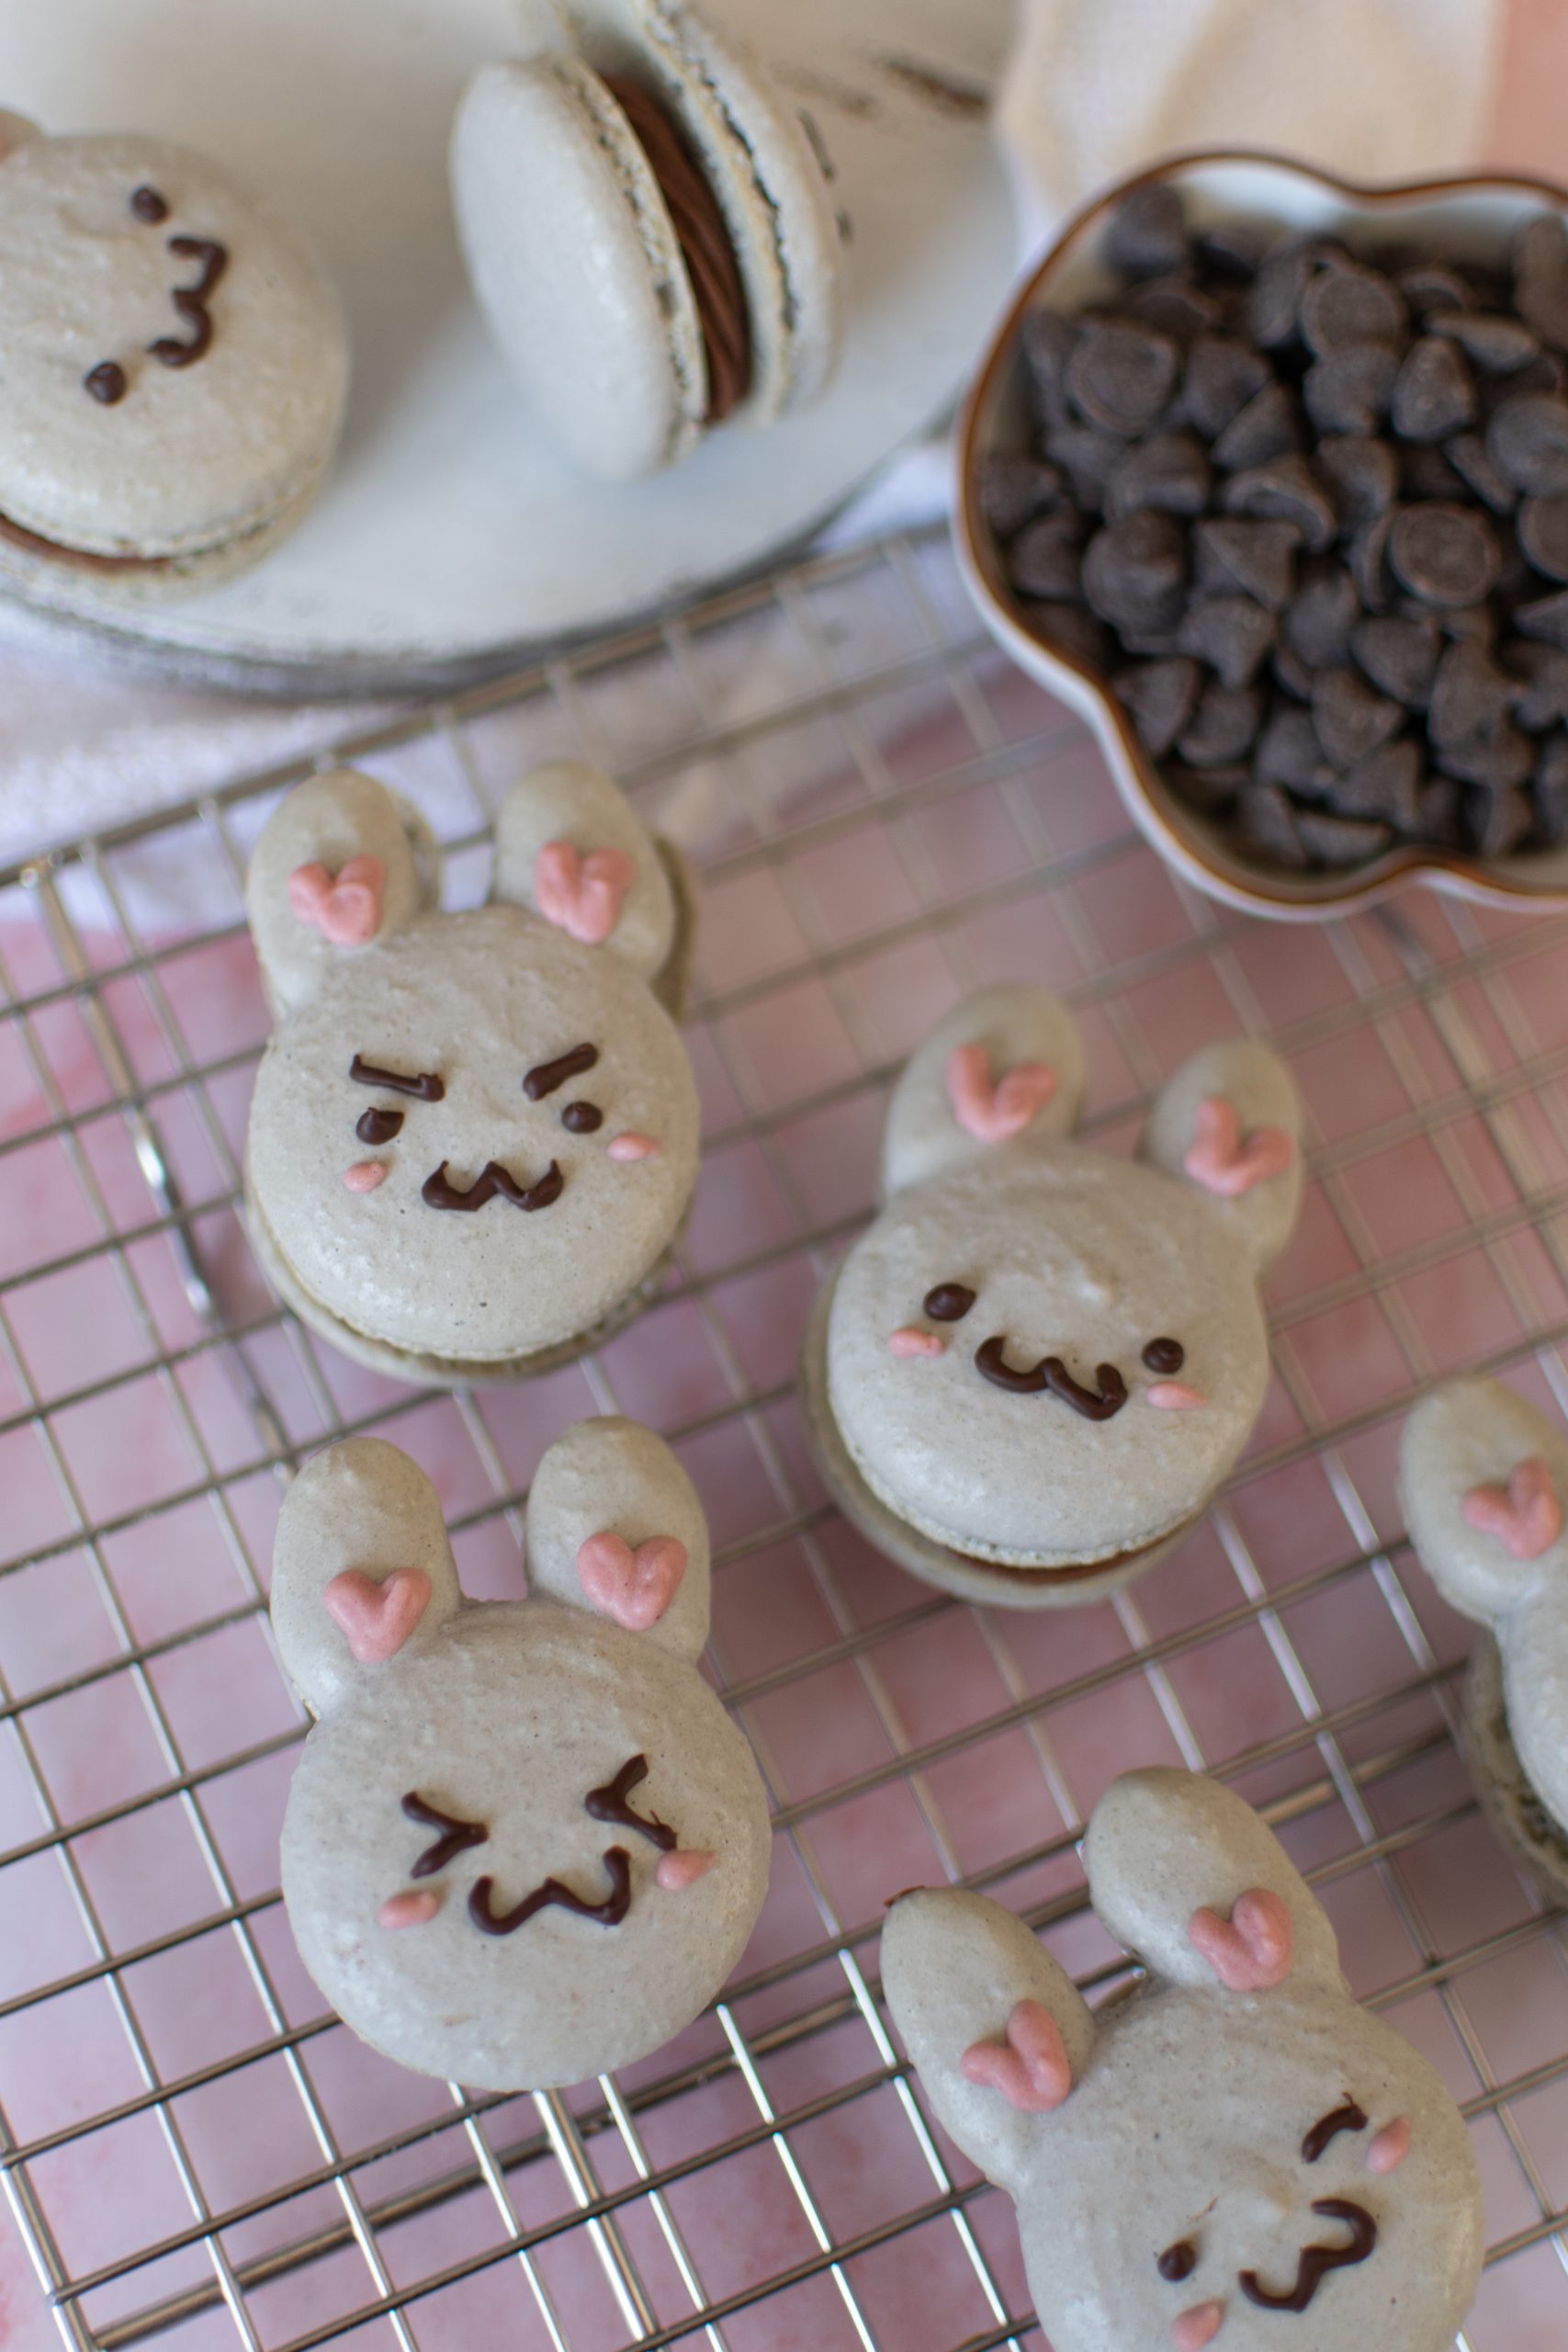 Bunny Macarons with Whipped Espresso Chocolate Ganache (French Method)